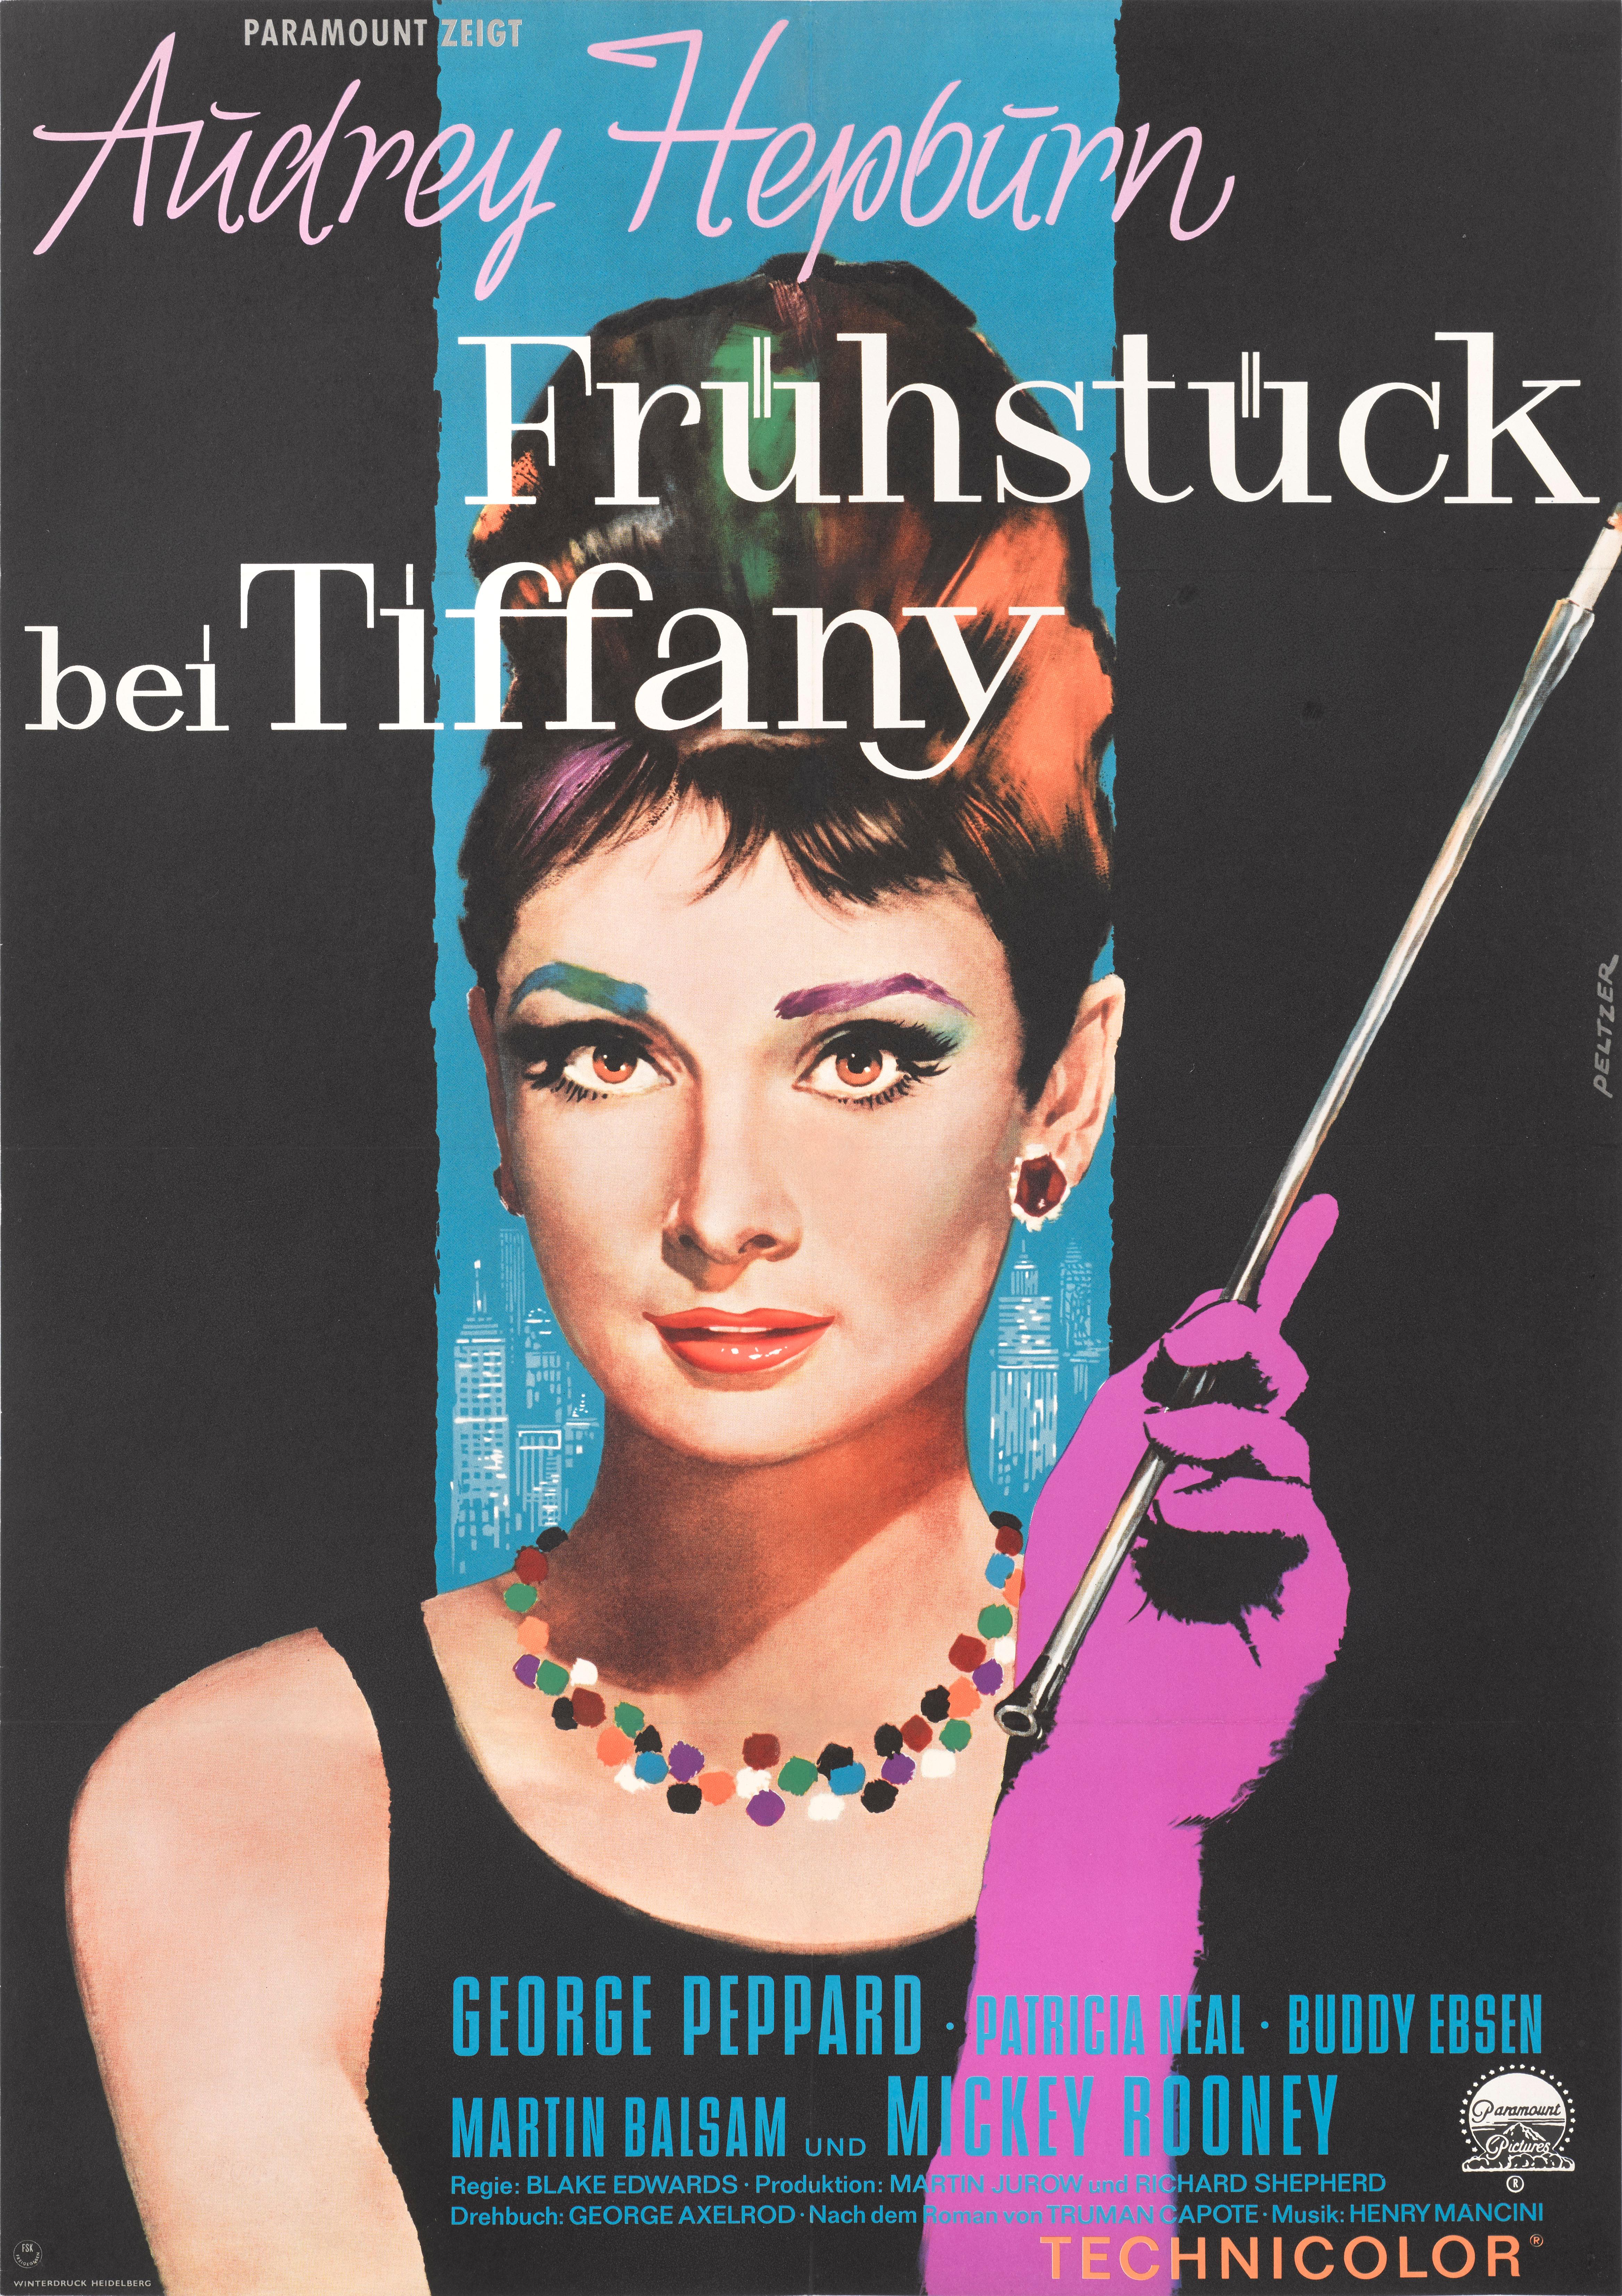 Original German film poster for Audrey Hepburn's most famous film Breakfast at Tiffany's 1961.
The artwork is by Lutz Peltzer (1925-2013) and is is unique to this German release poster. 
It was created for the films first German release in 1962.